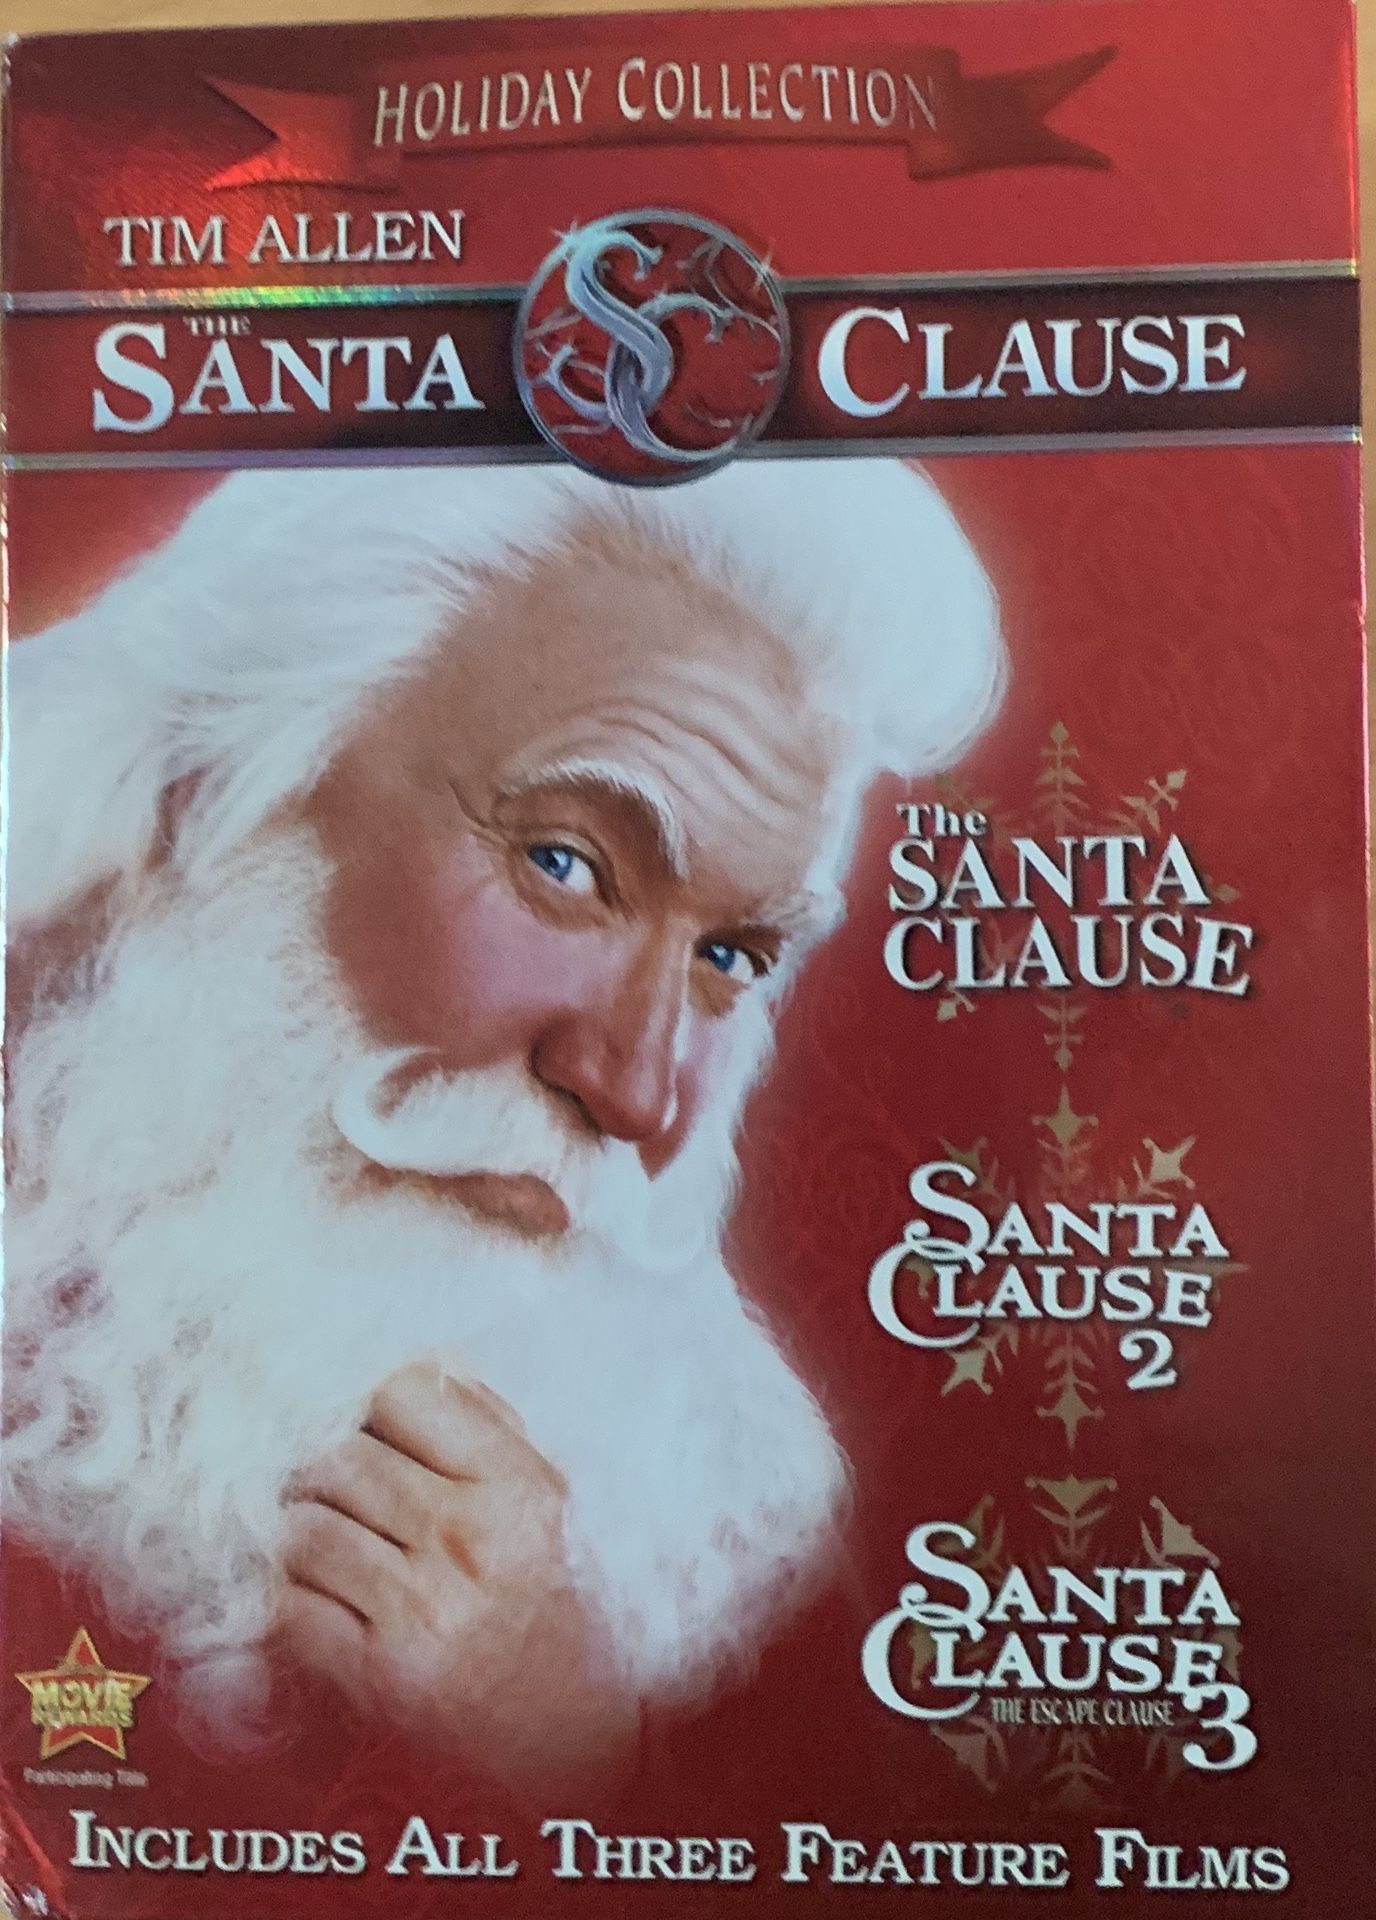 The Santa Clause DVD Collection